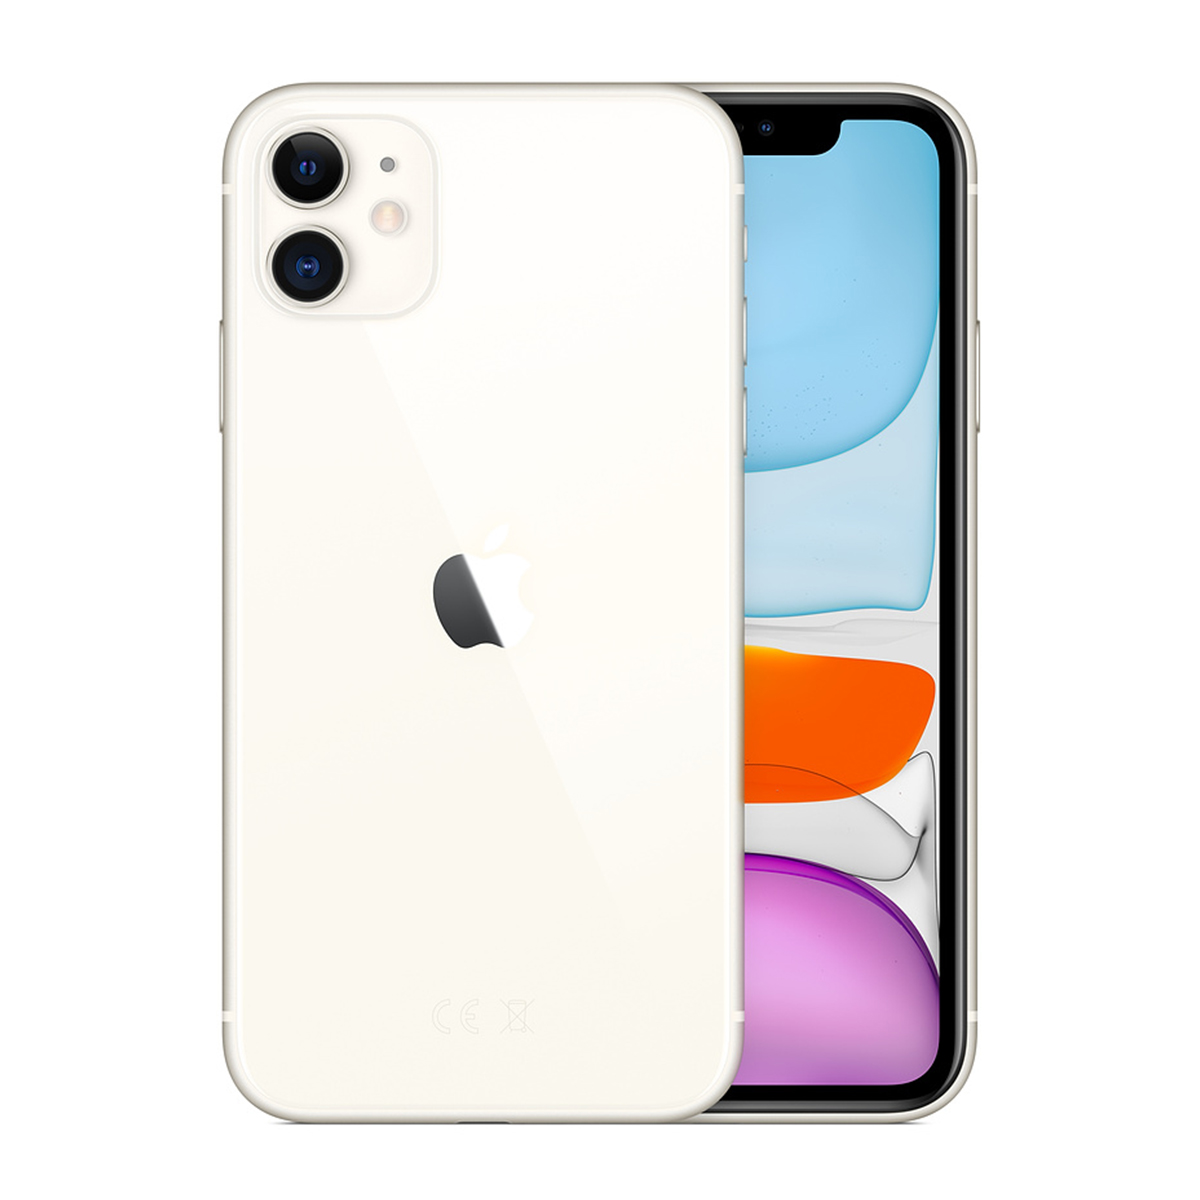 Identifying Your IPhone 11 Model: Steps To Determine Your Specific Device